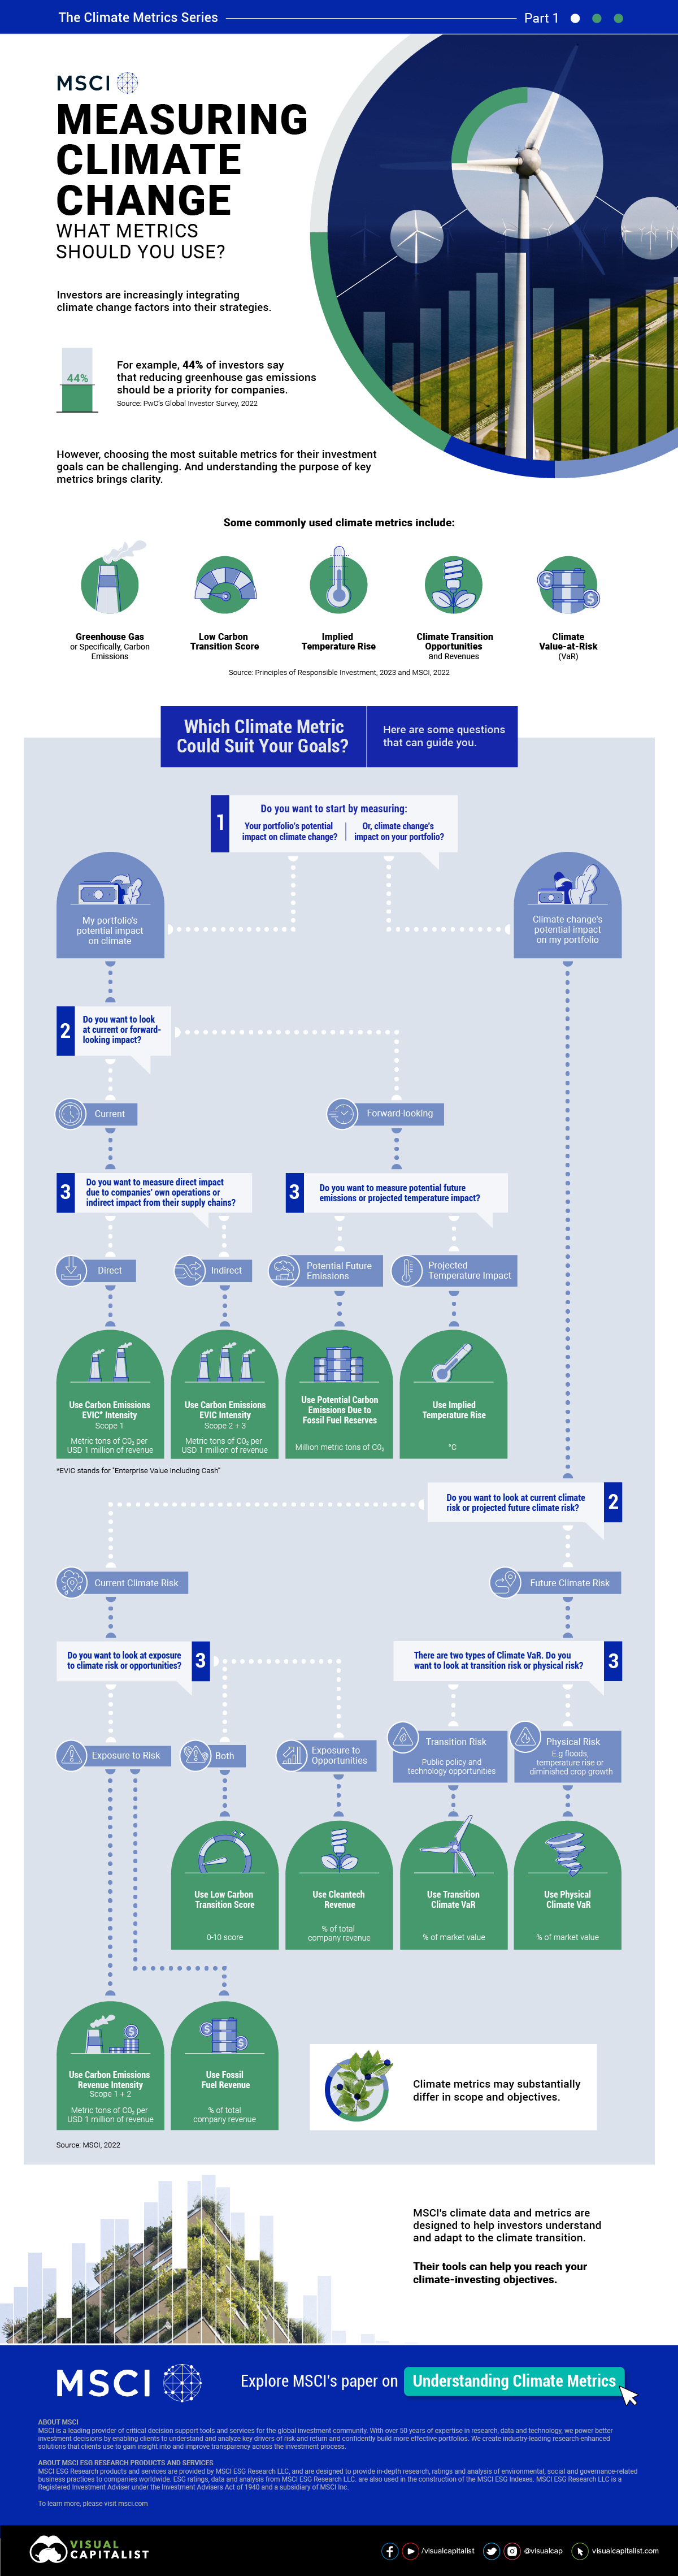 Infographic showing flowchart of climate metrics for investors looking to measure climate change initiatives